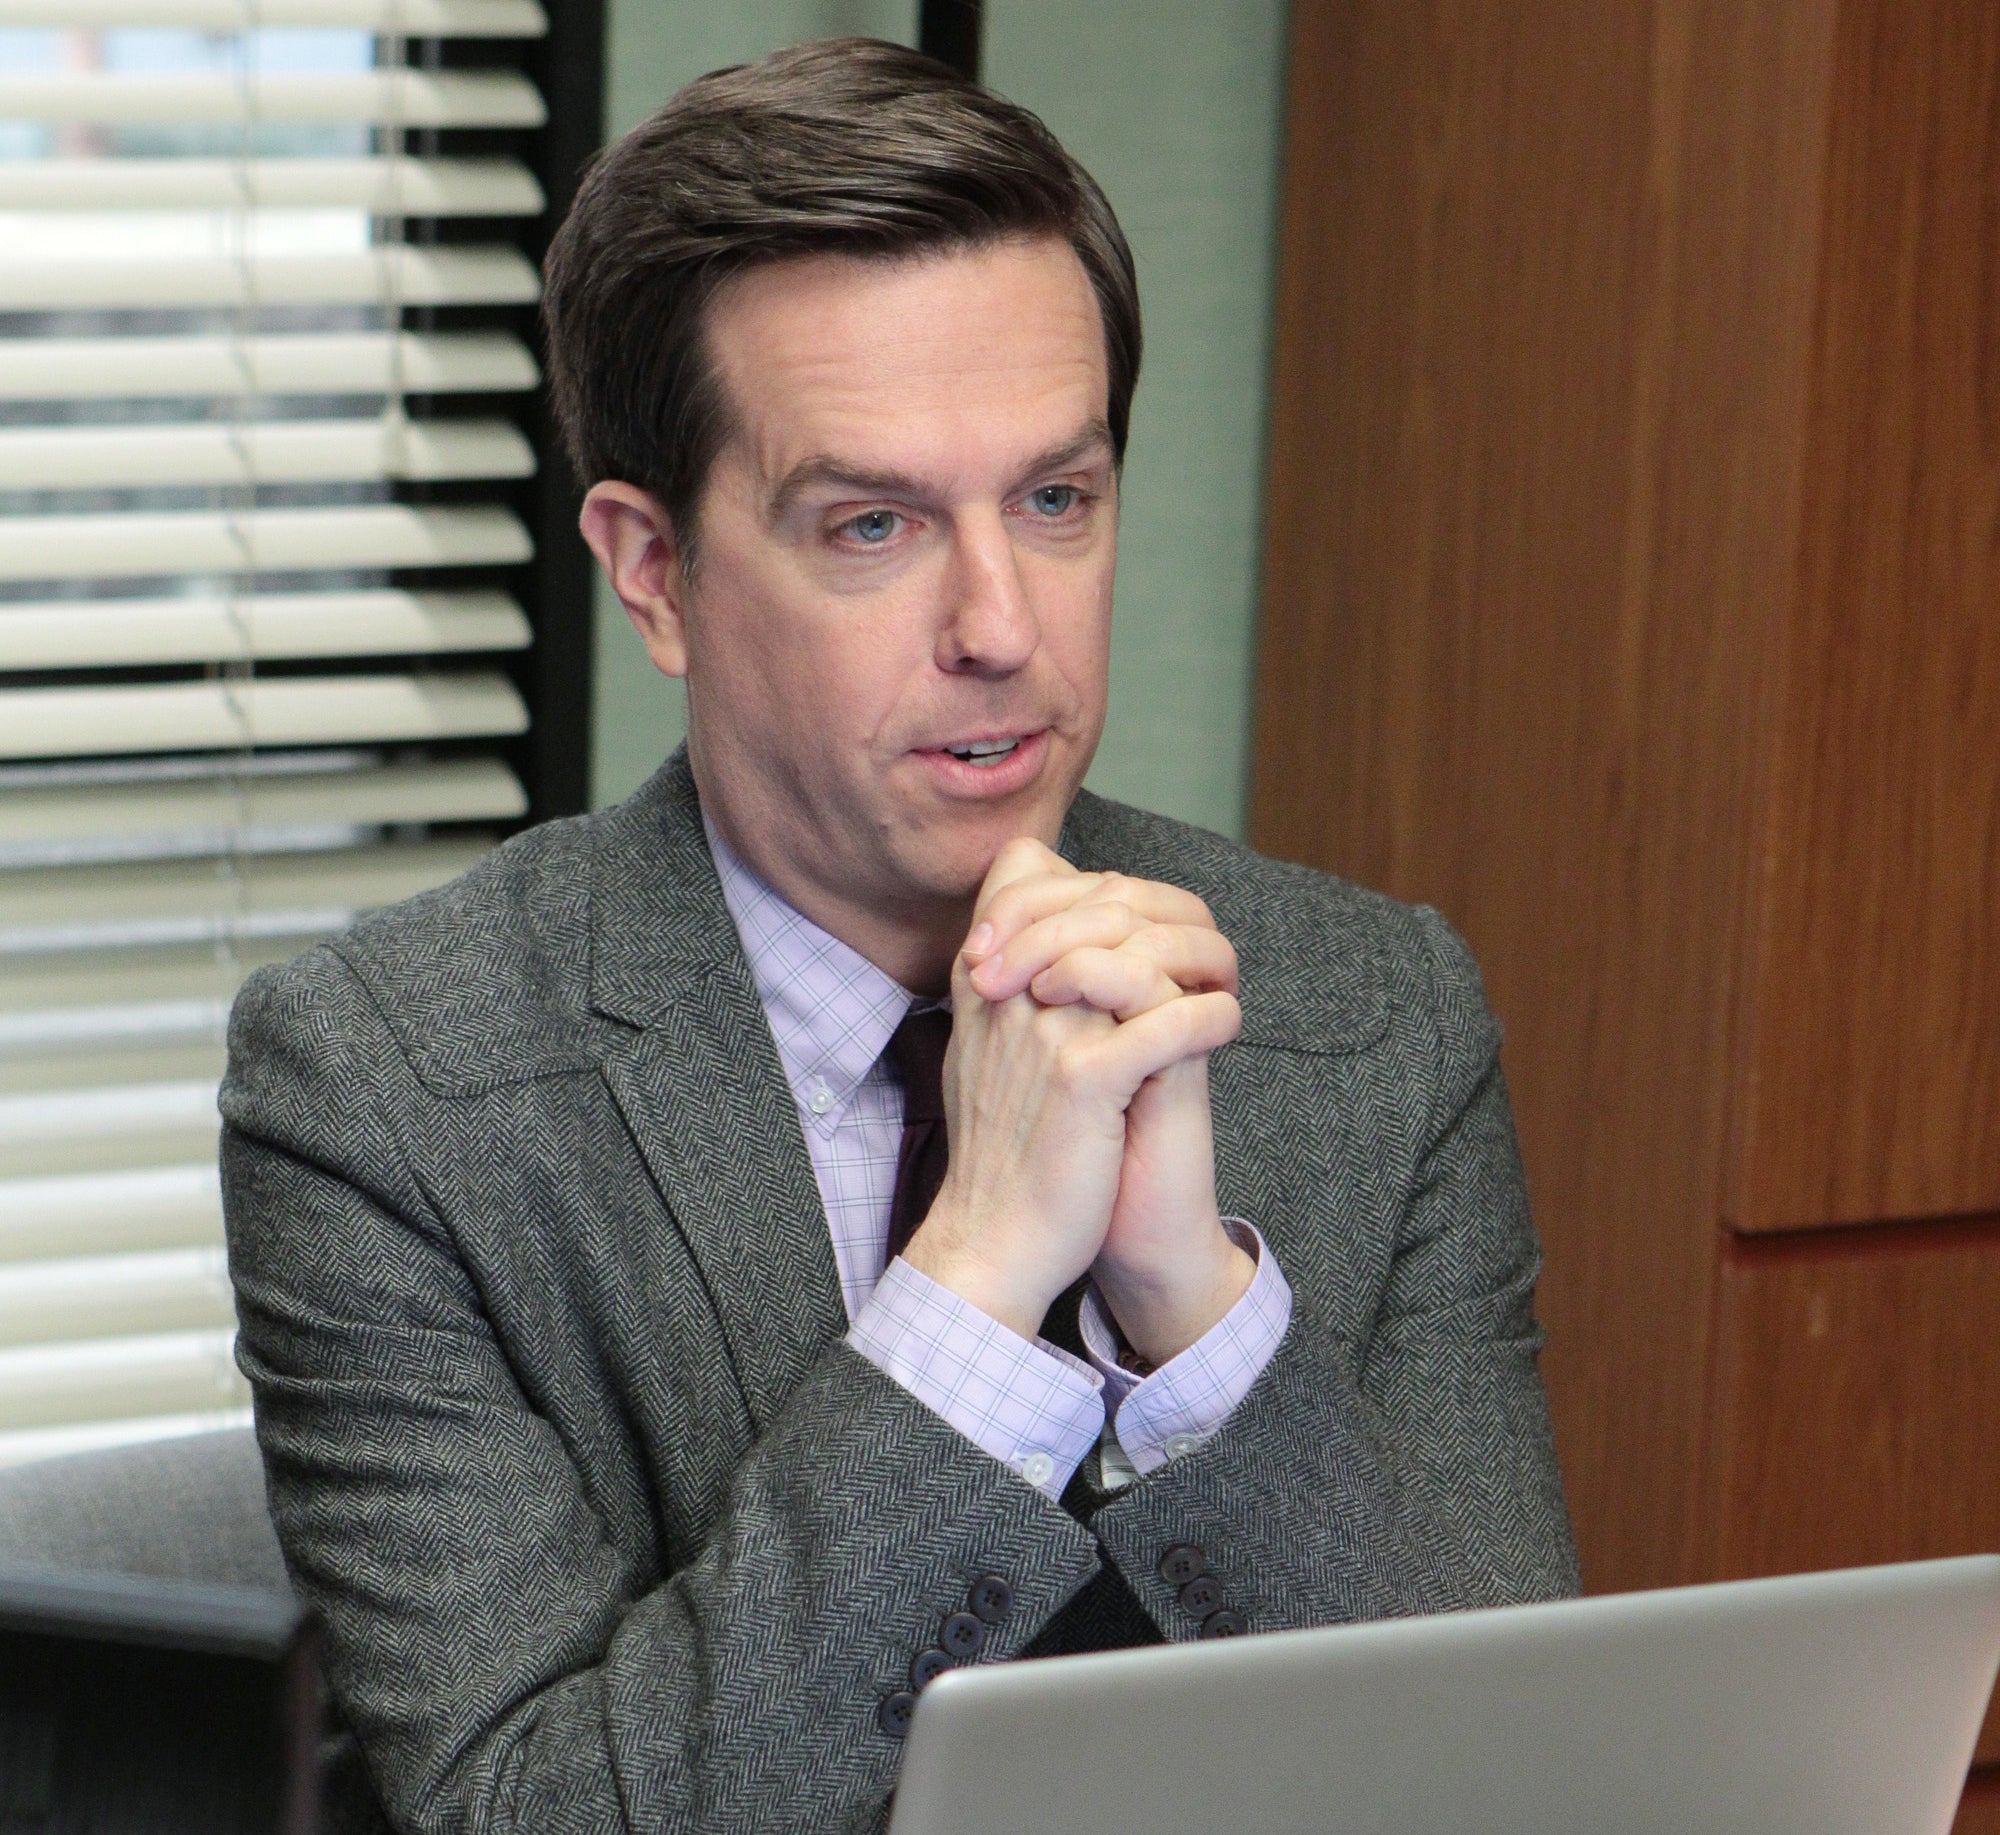 Character Andy Bernard from The Office in an office setting with a laptop and desk accessories